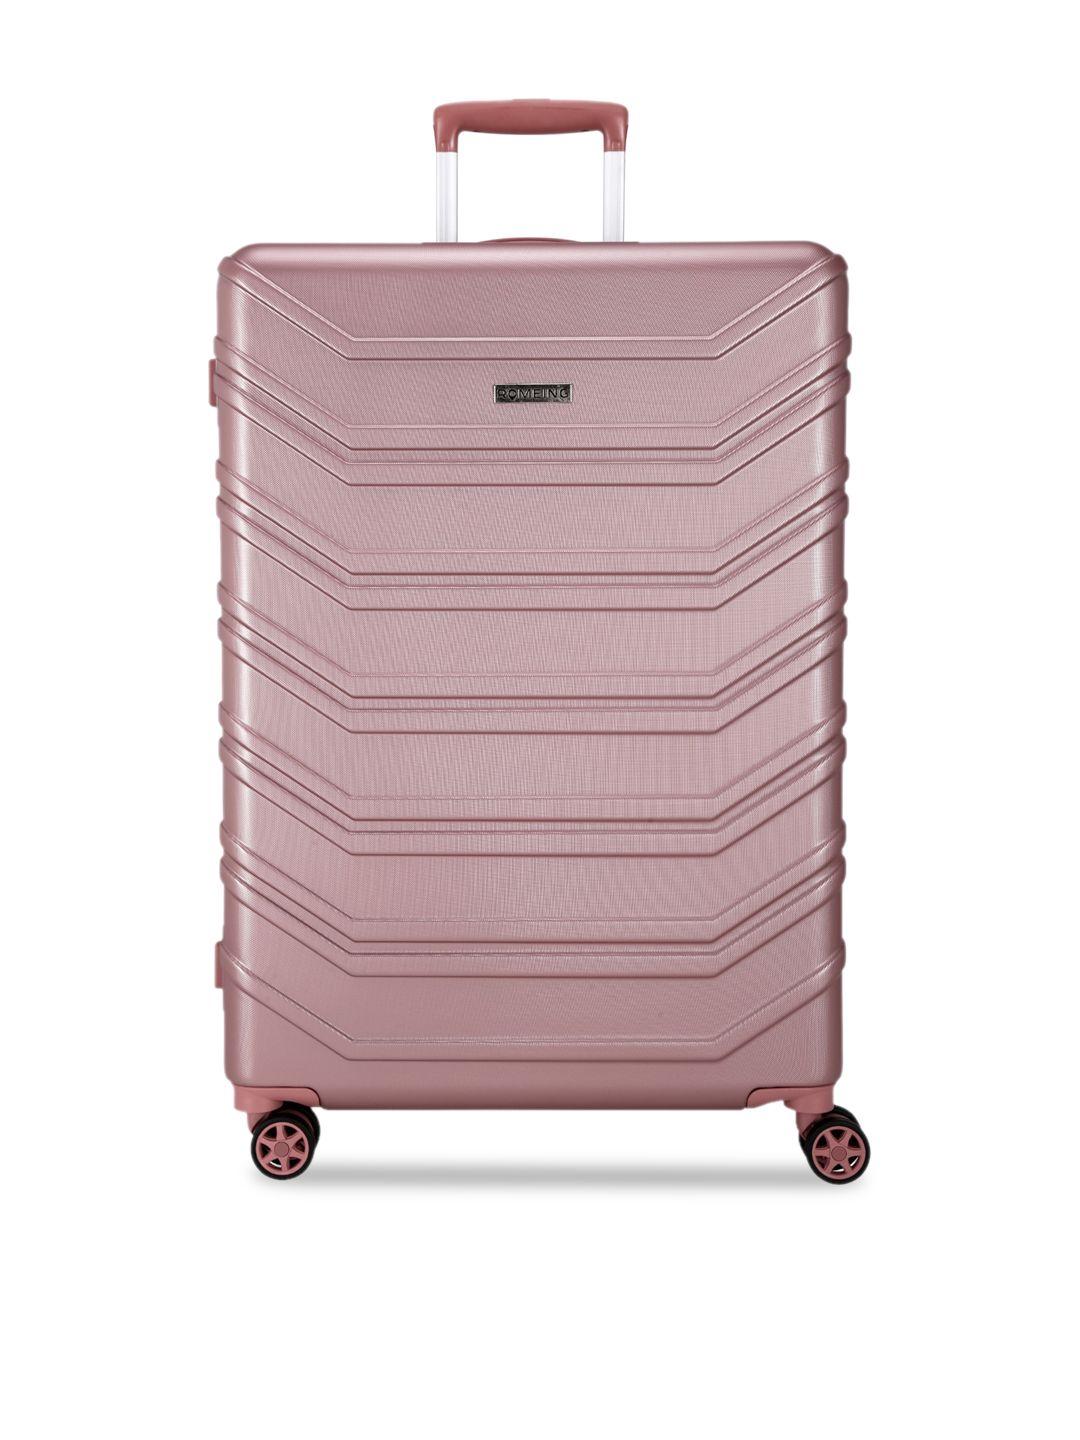 romeing monopoli rose gold-colored textured polycarbonate large trolley bag